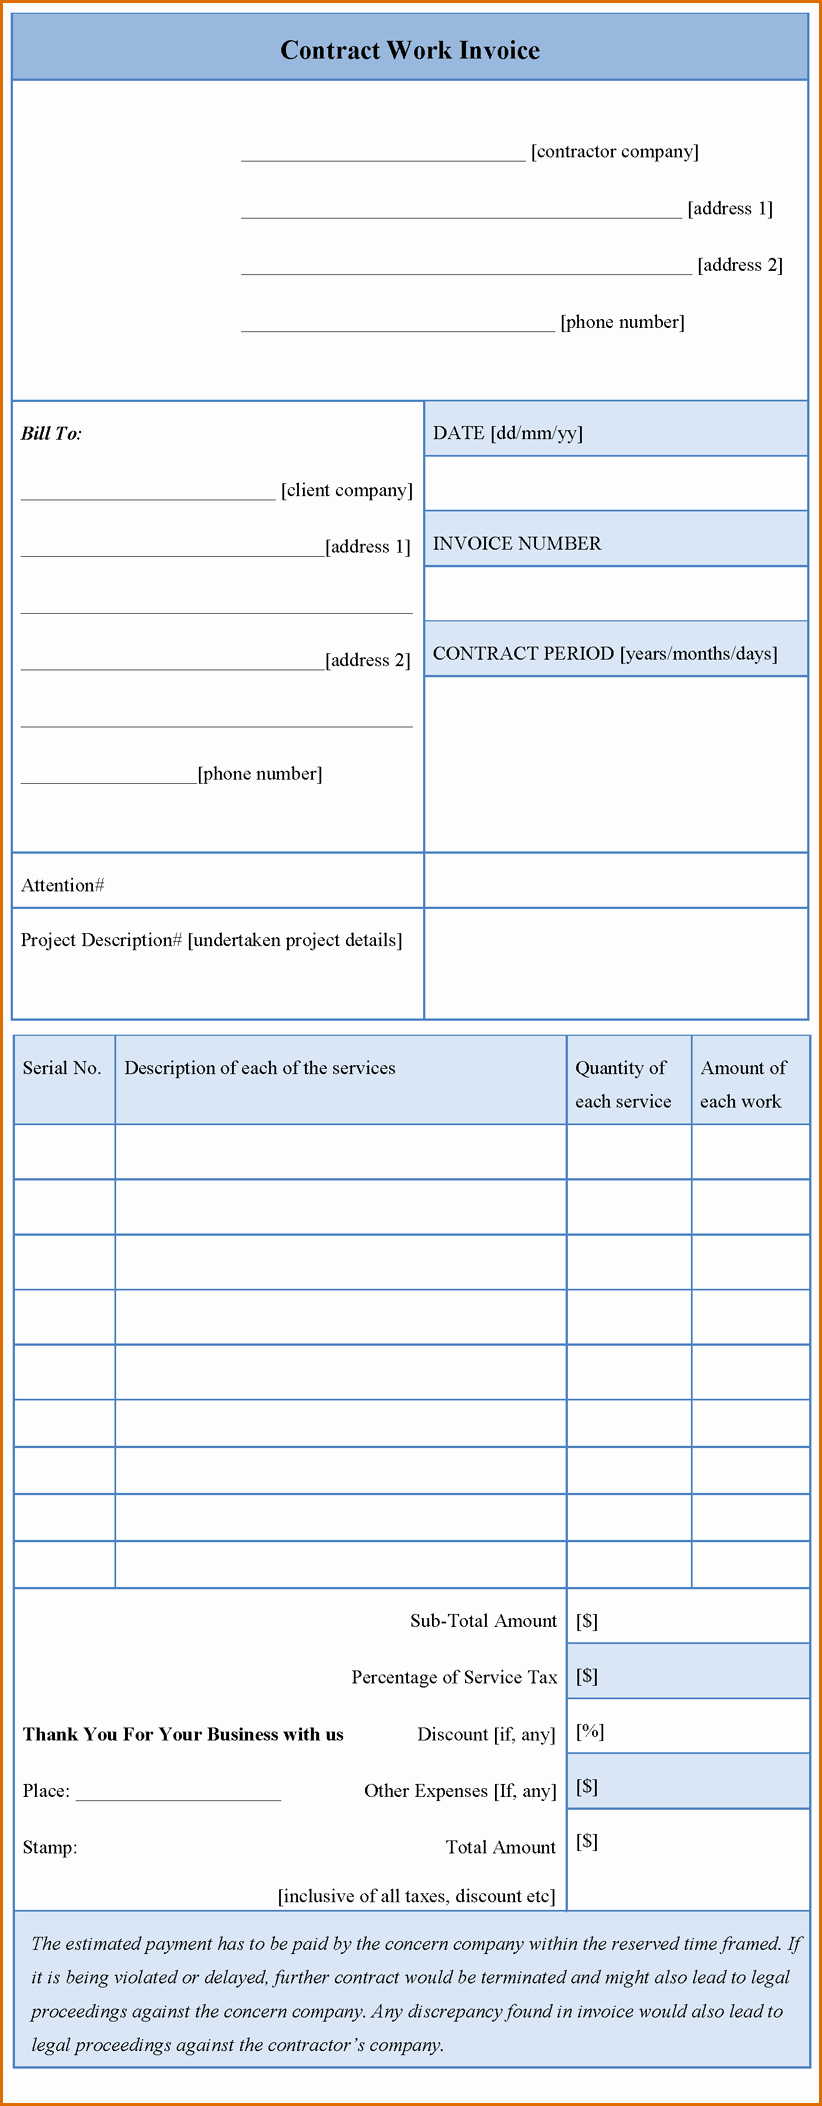 Invoice Template for Contract Work New 7 Work Invoice Template